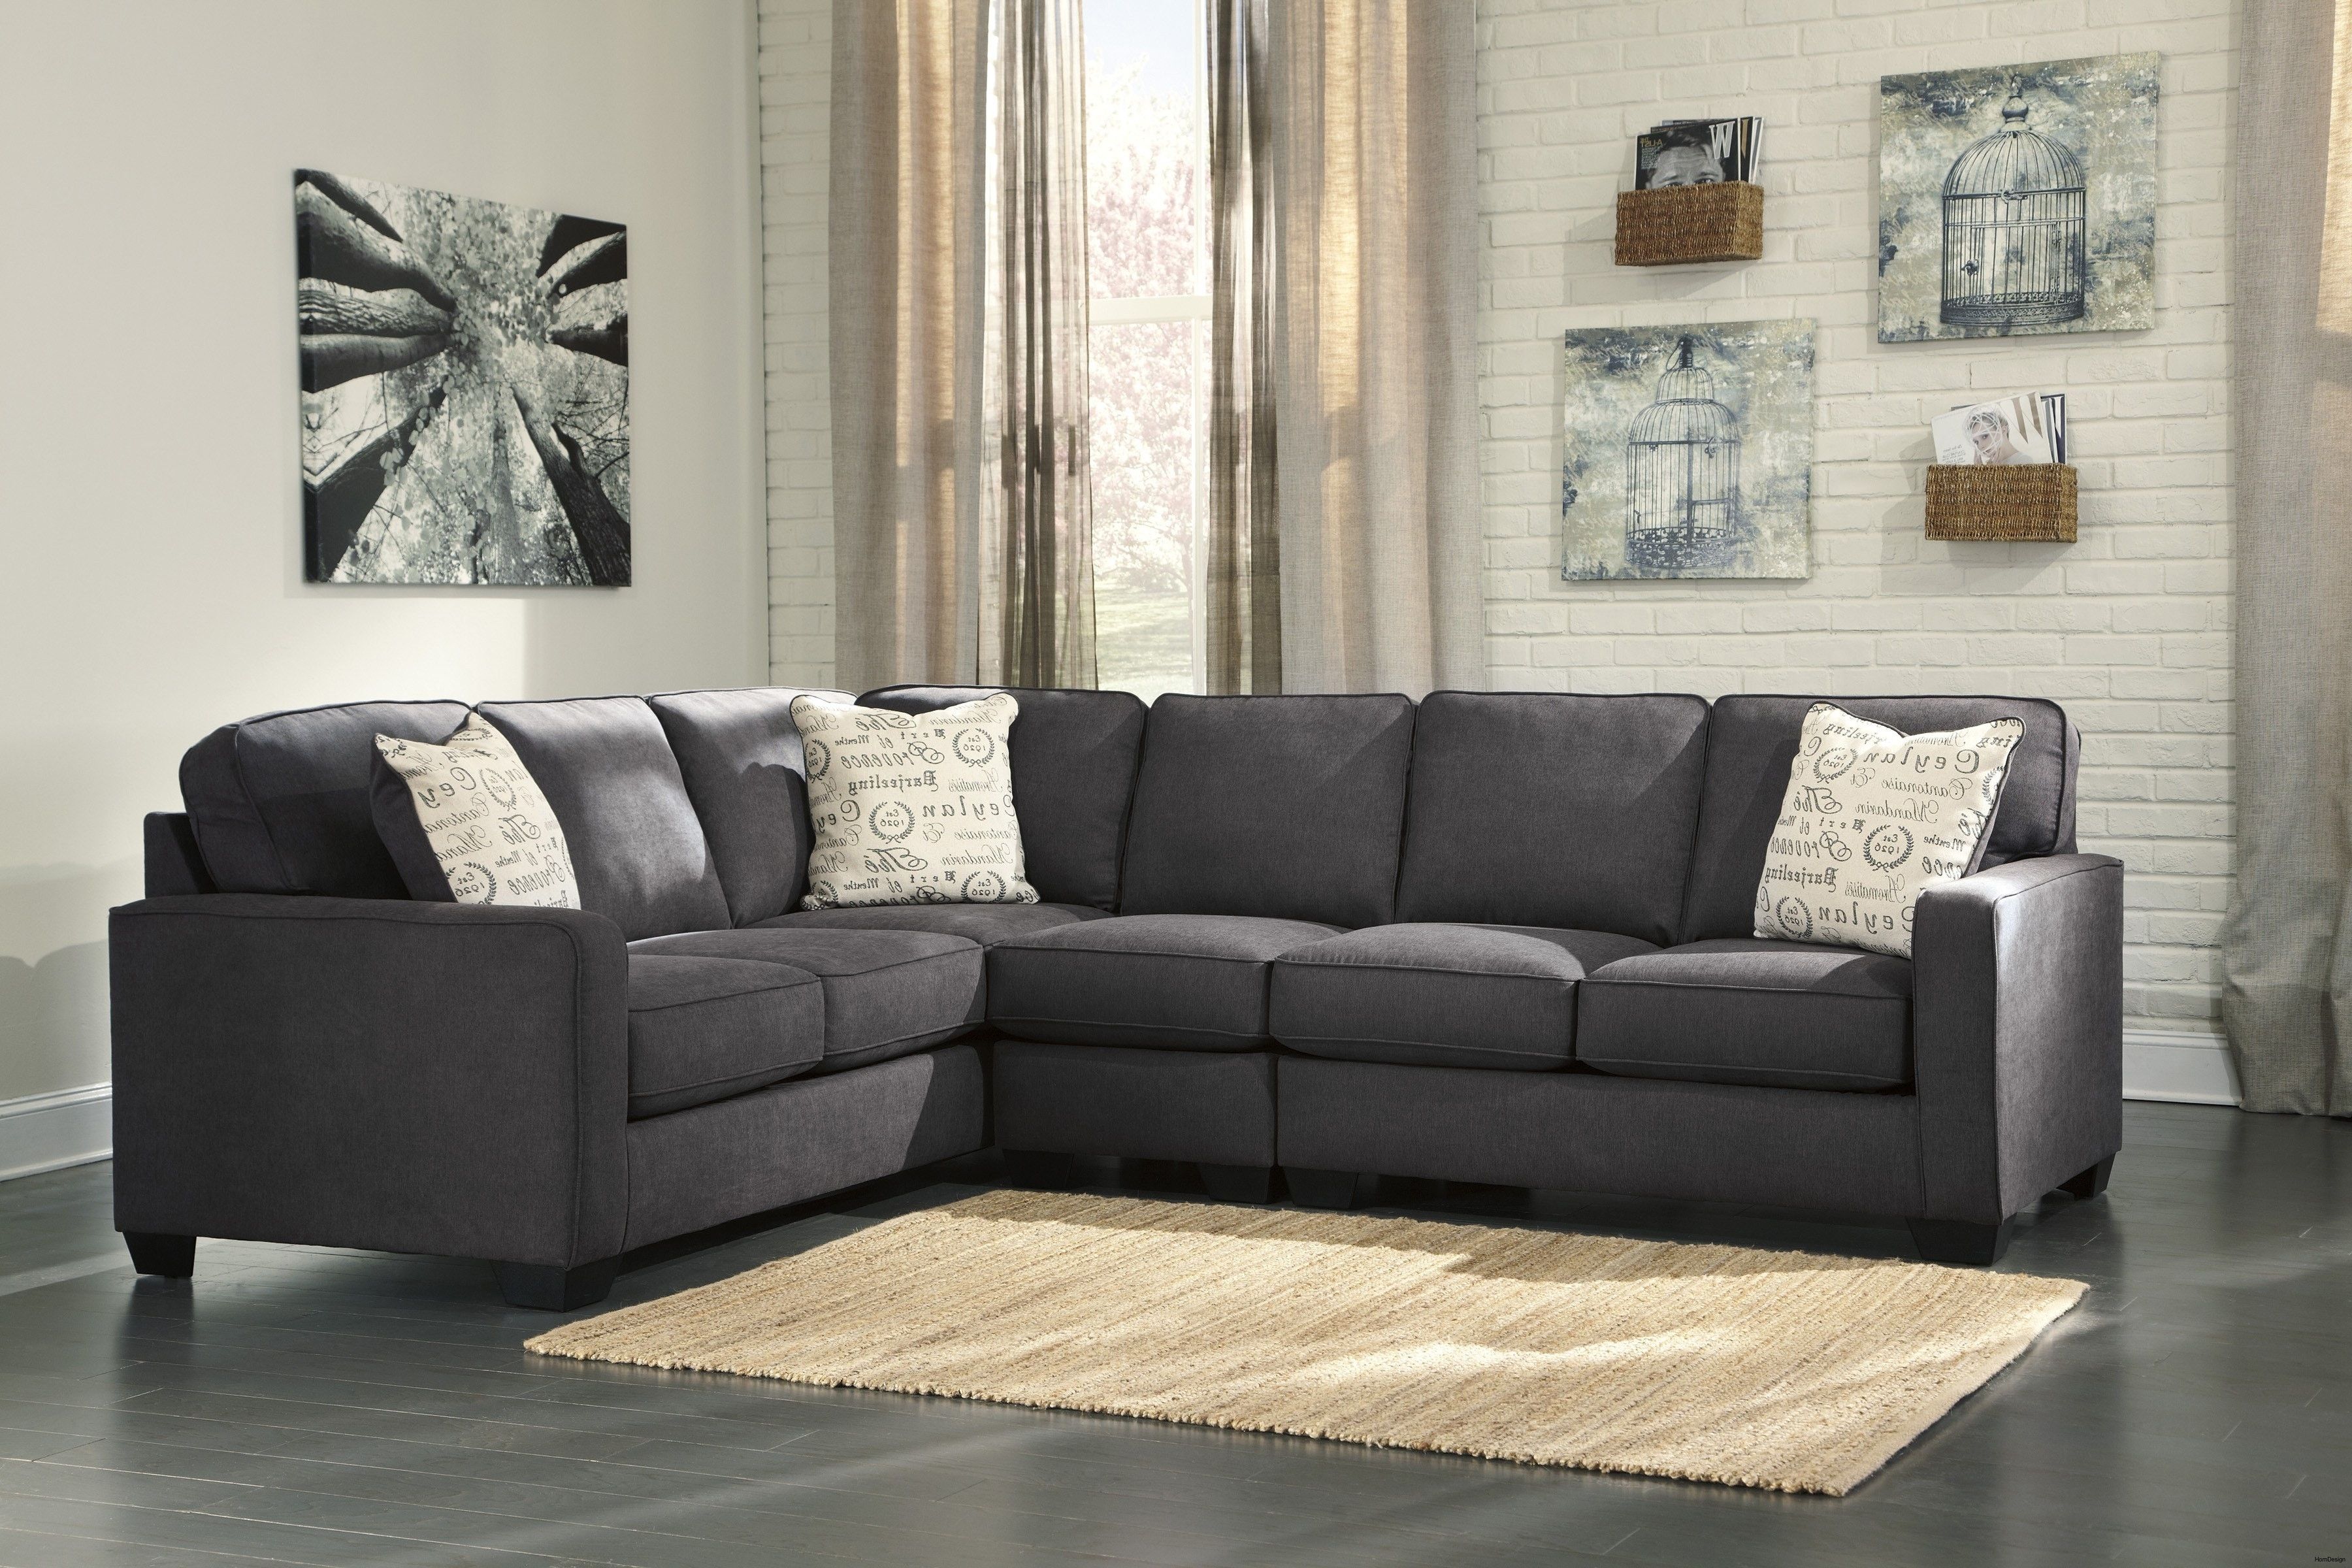 3 Piece Sectional Sofa With Chaise Reviews | Baci Living Room For Sierra Down 3 Piece Sectionals With Laf Chaise (View 14 of 30)